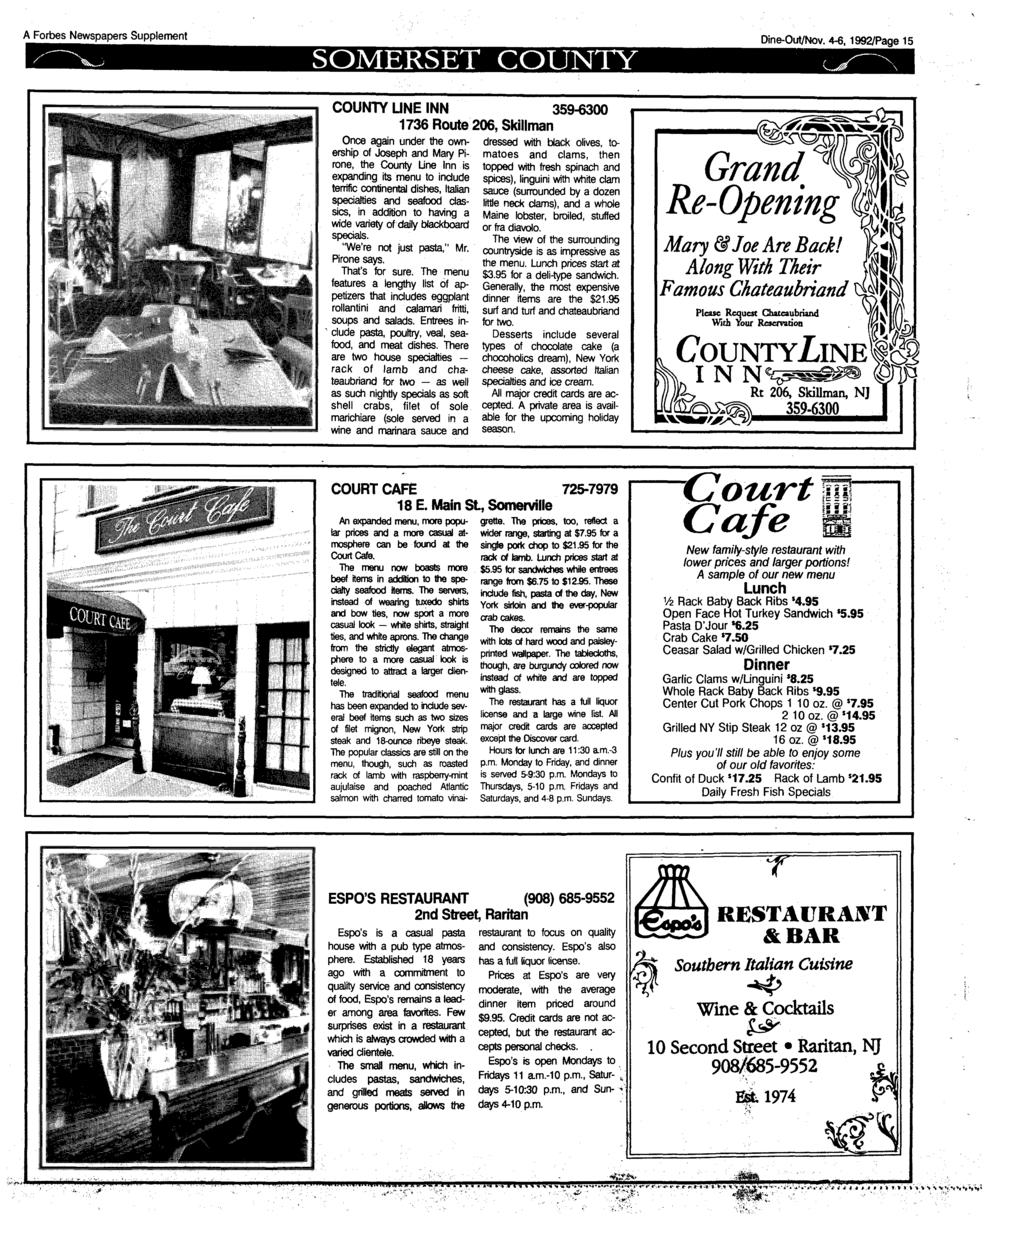 A Forbes Newspapers Supplement SOMERSET COUNTY Dine-Out/Nov.